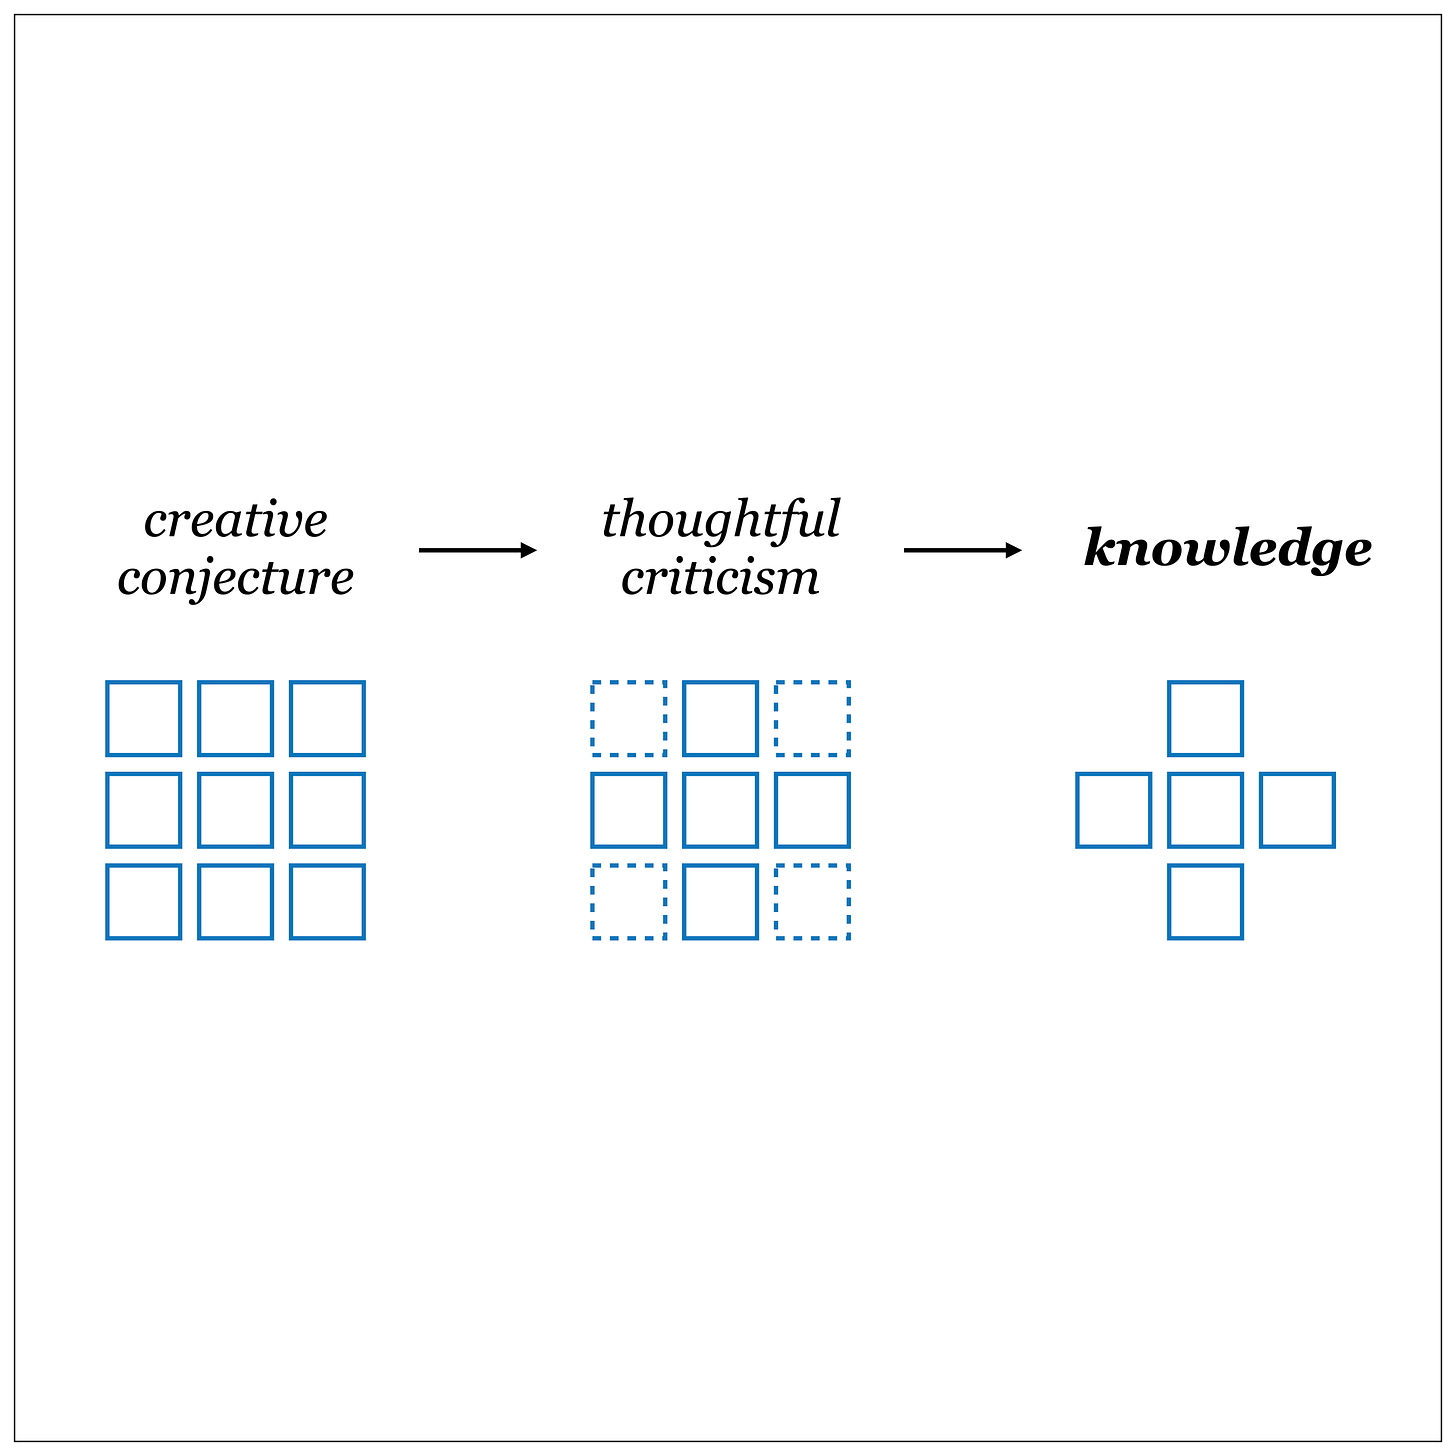 Diagram showing how creative conjecture starts with 9 small squares in a 3x3 matrix. The process of conjecture removes the corner squares, leaving a "cross" which signifies knowledge